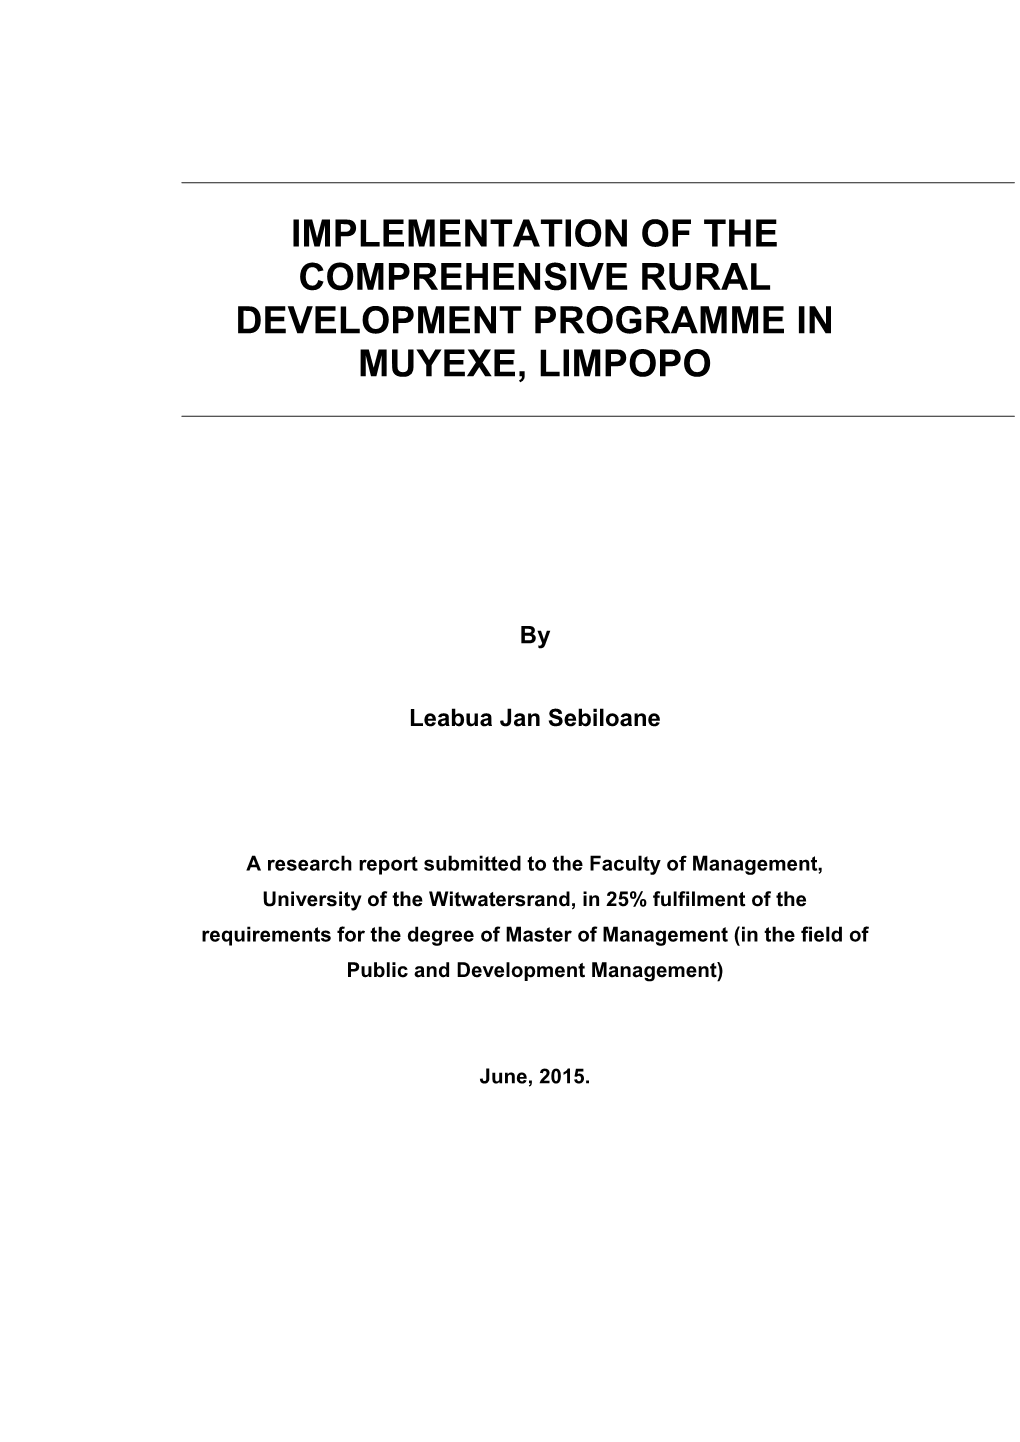 Implementation of the Comprehensive Rural Development Programme in Muyexe, Limpopo